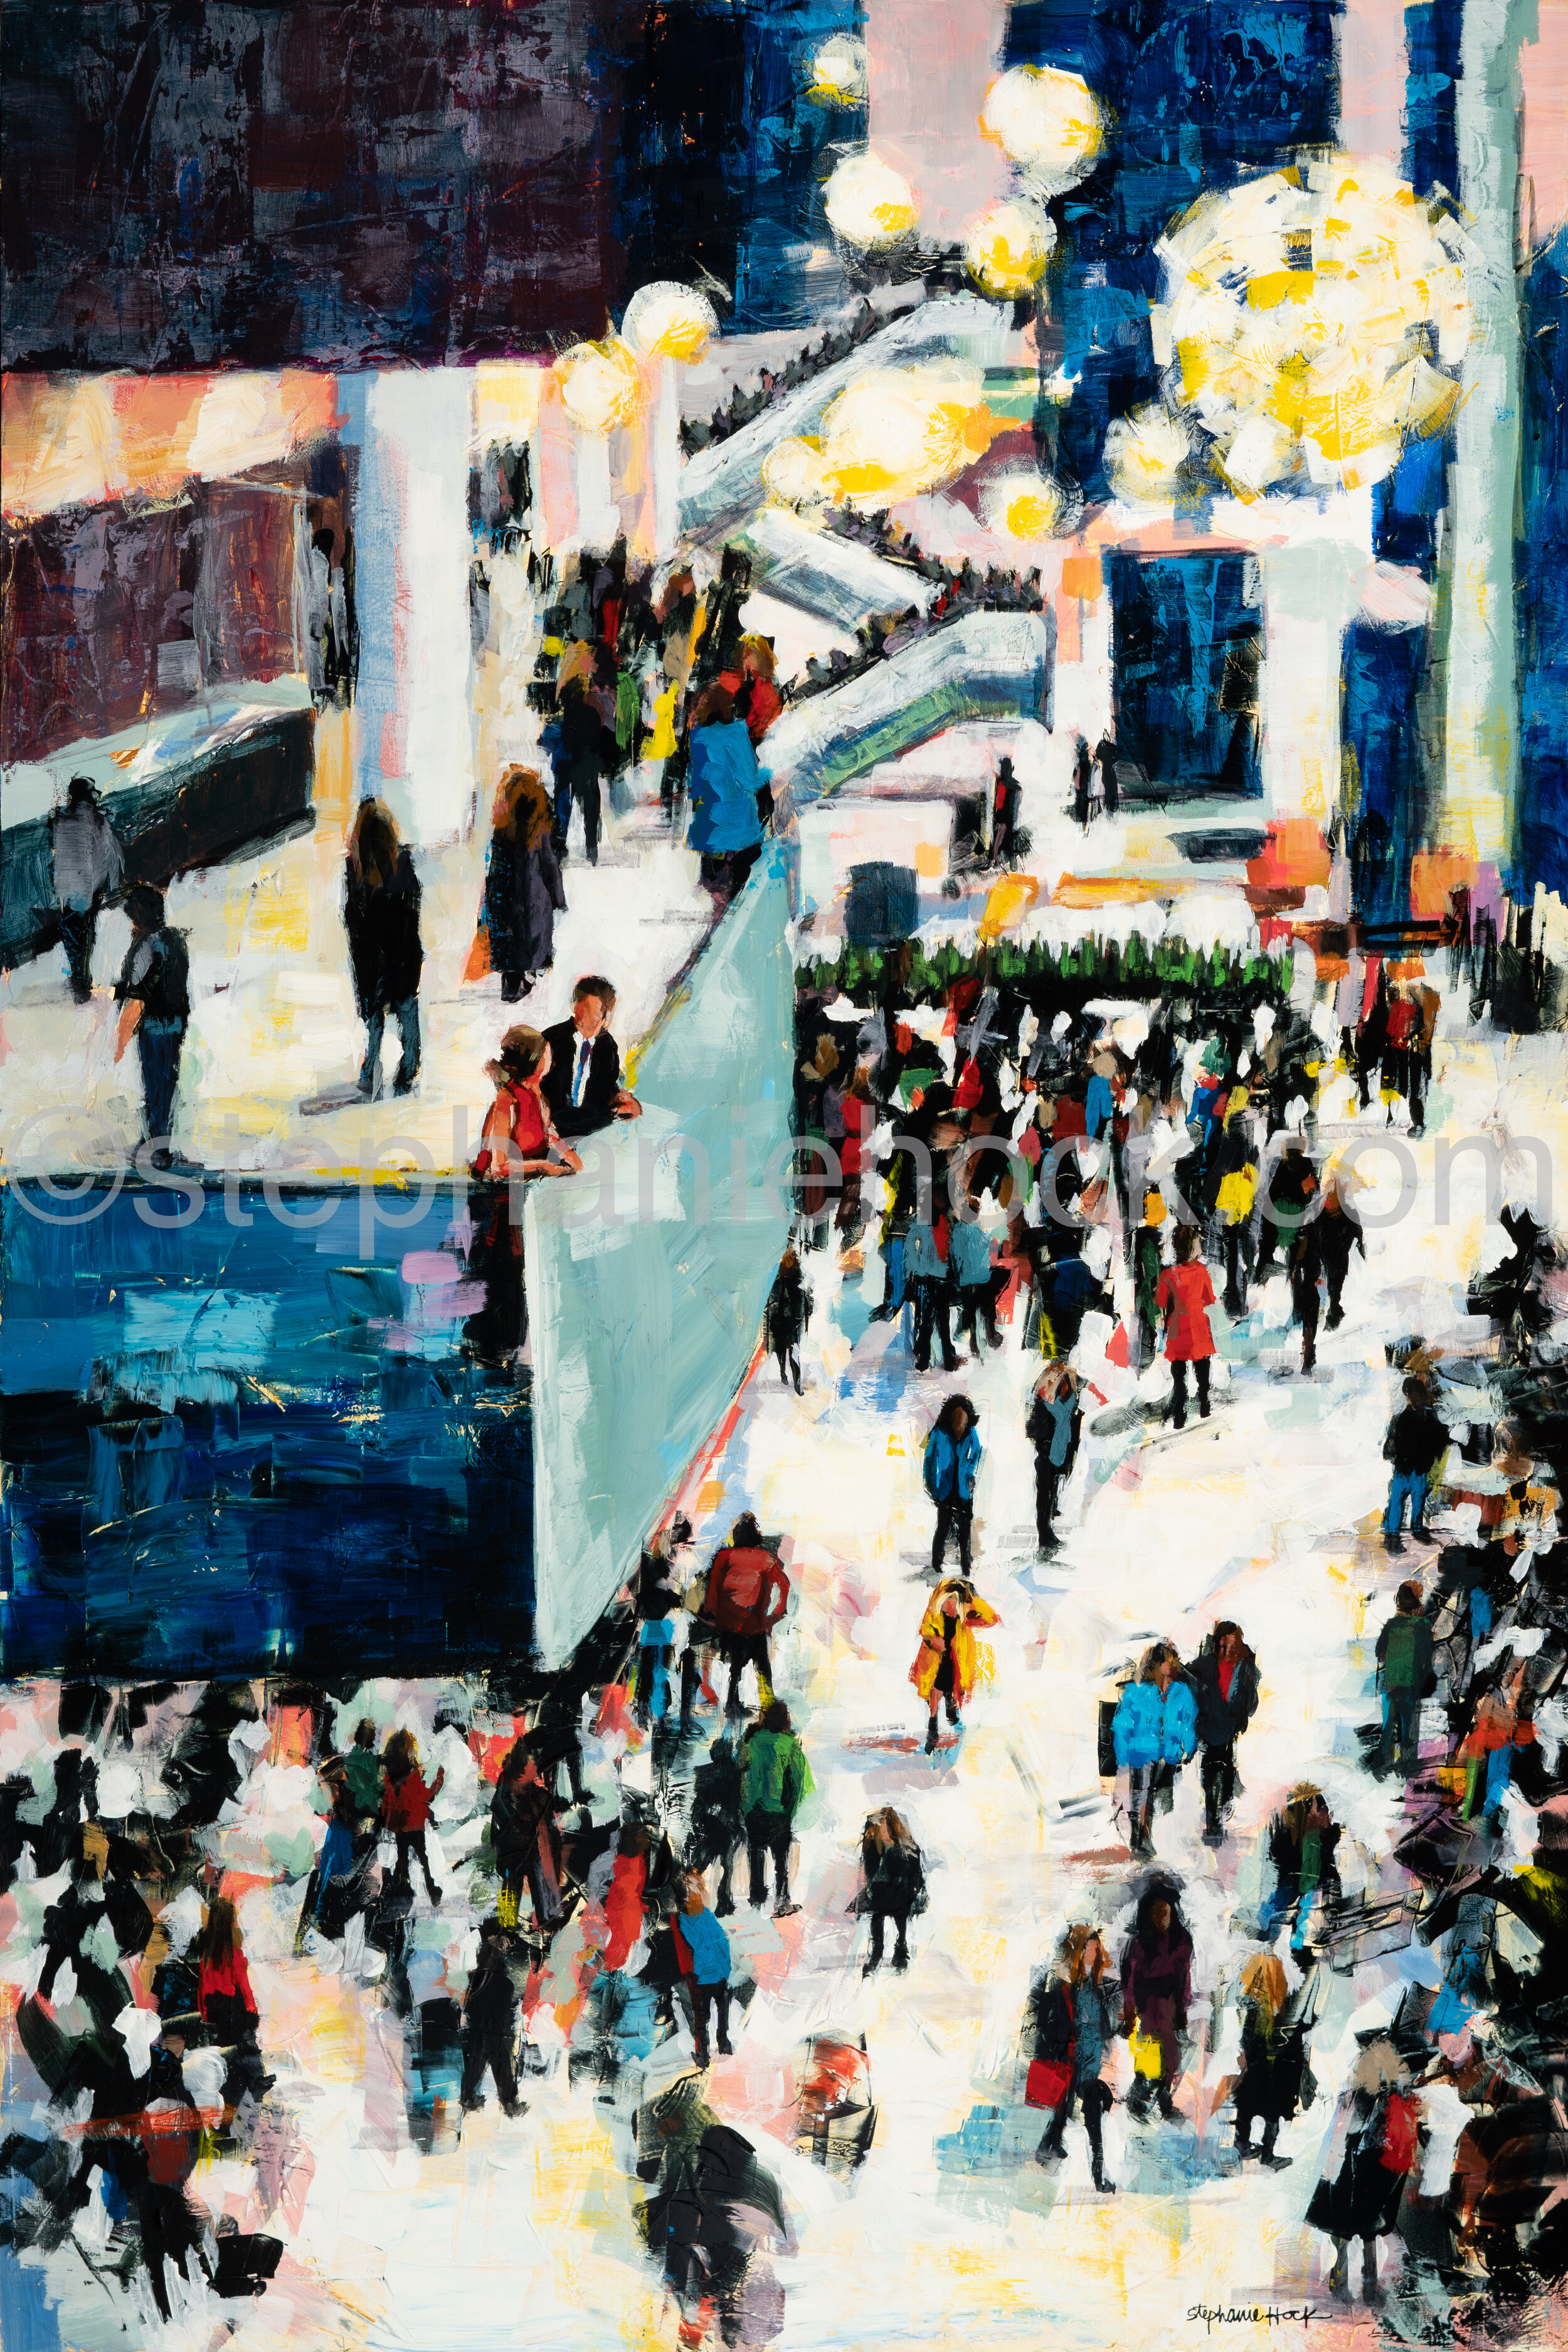 2072 Connection of a Crowd 24x36.jpg